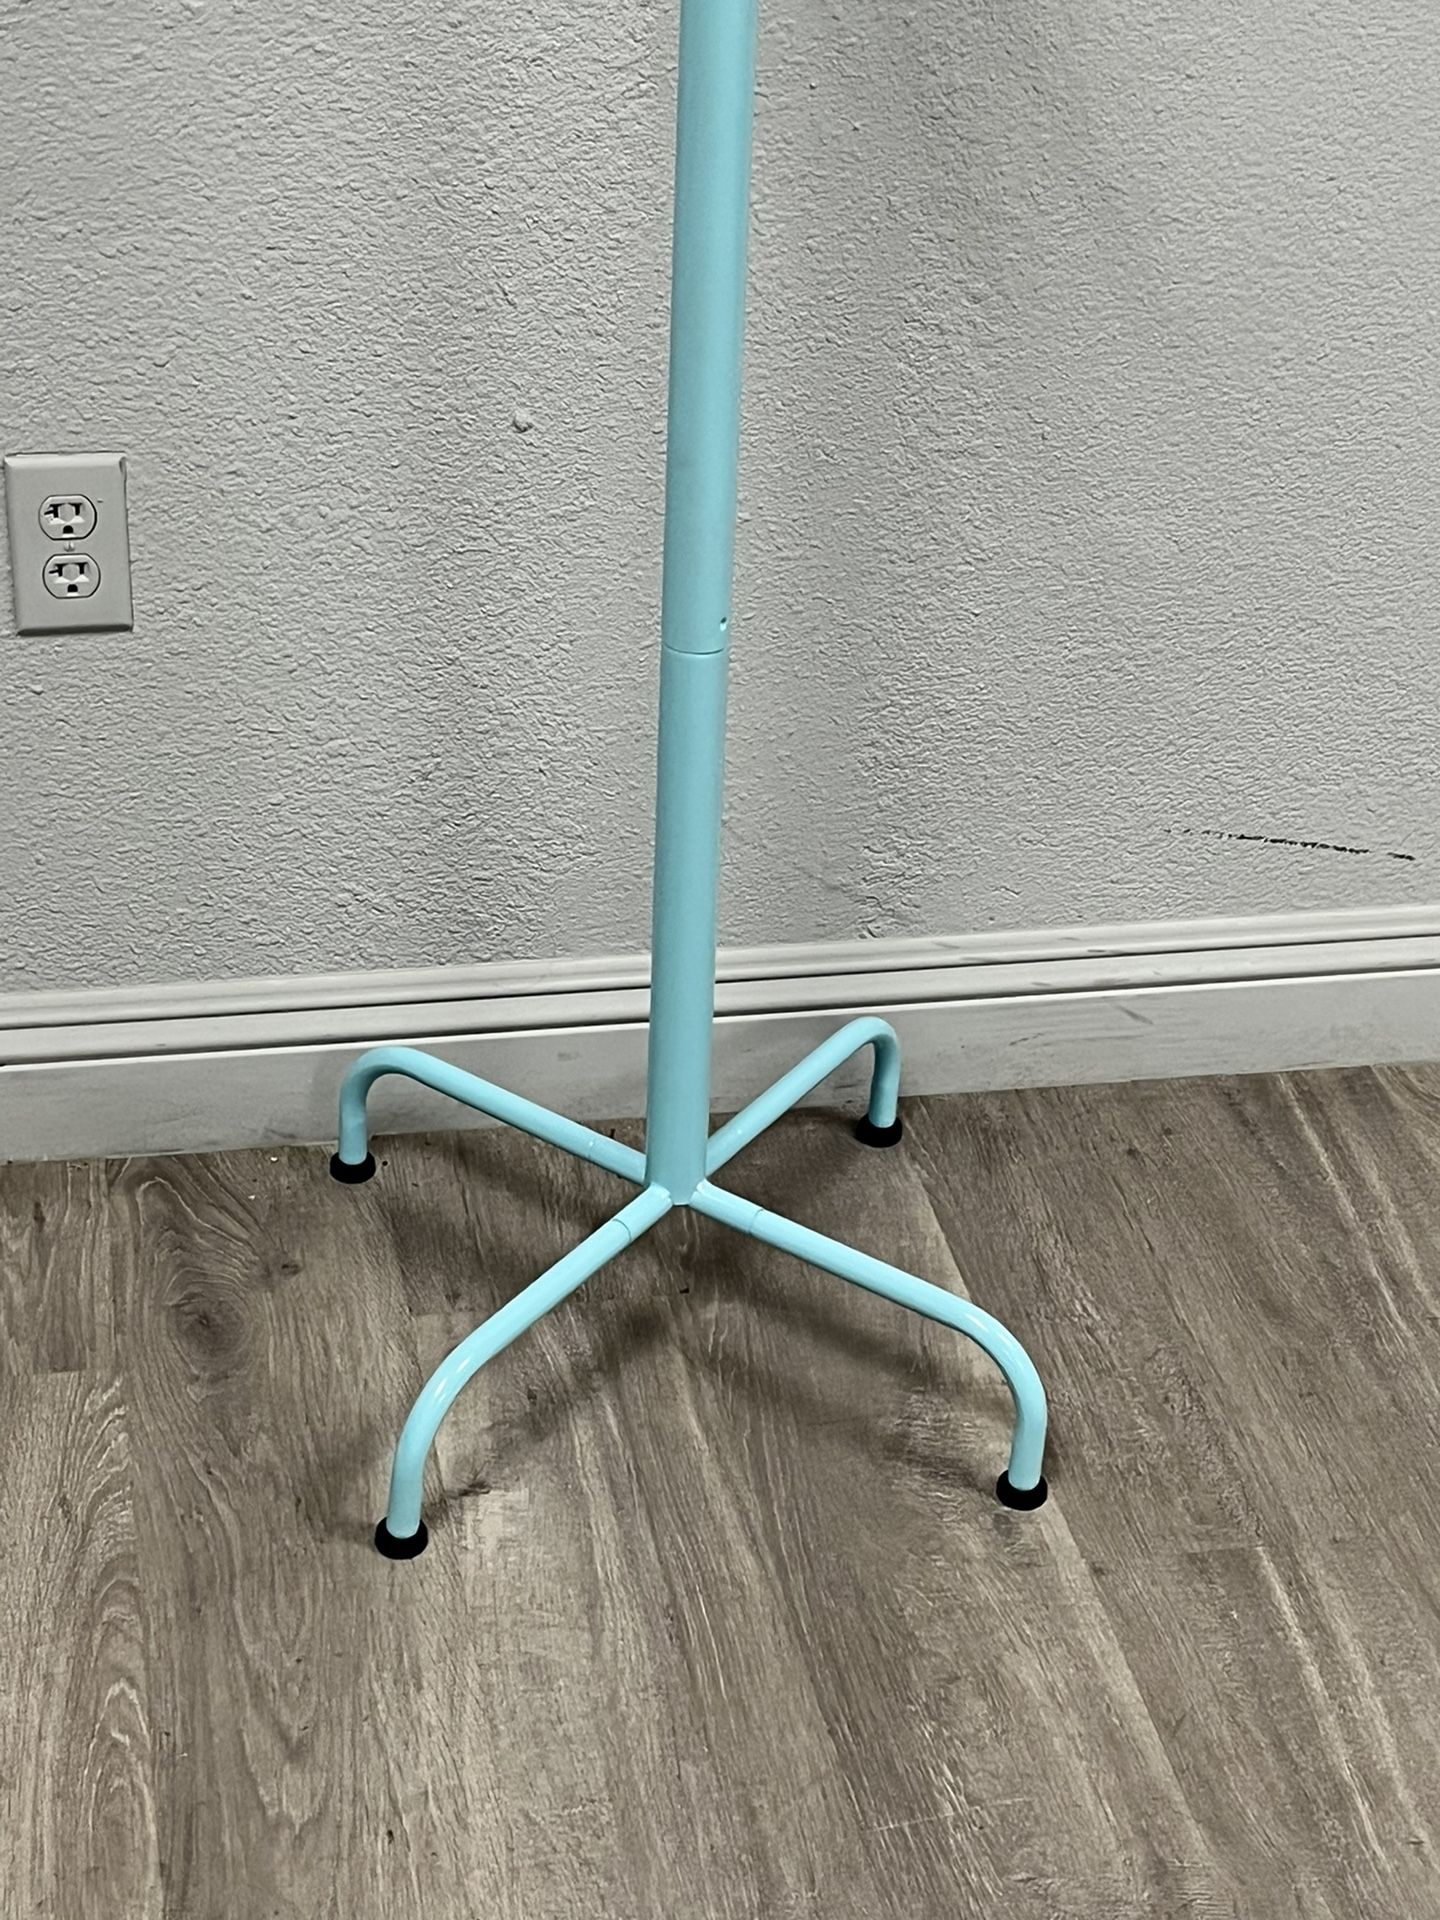 New Tiffany Blue Modern Coat Rack 6 ft Tall : 4 available at $20